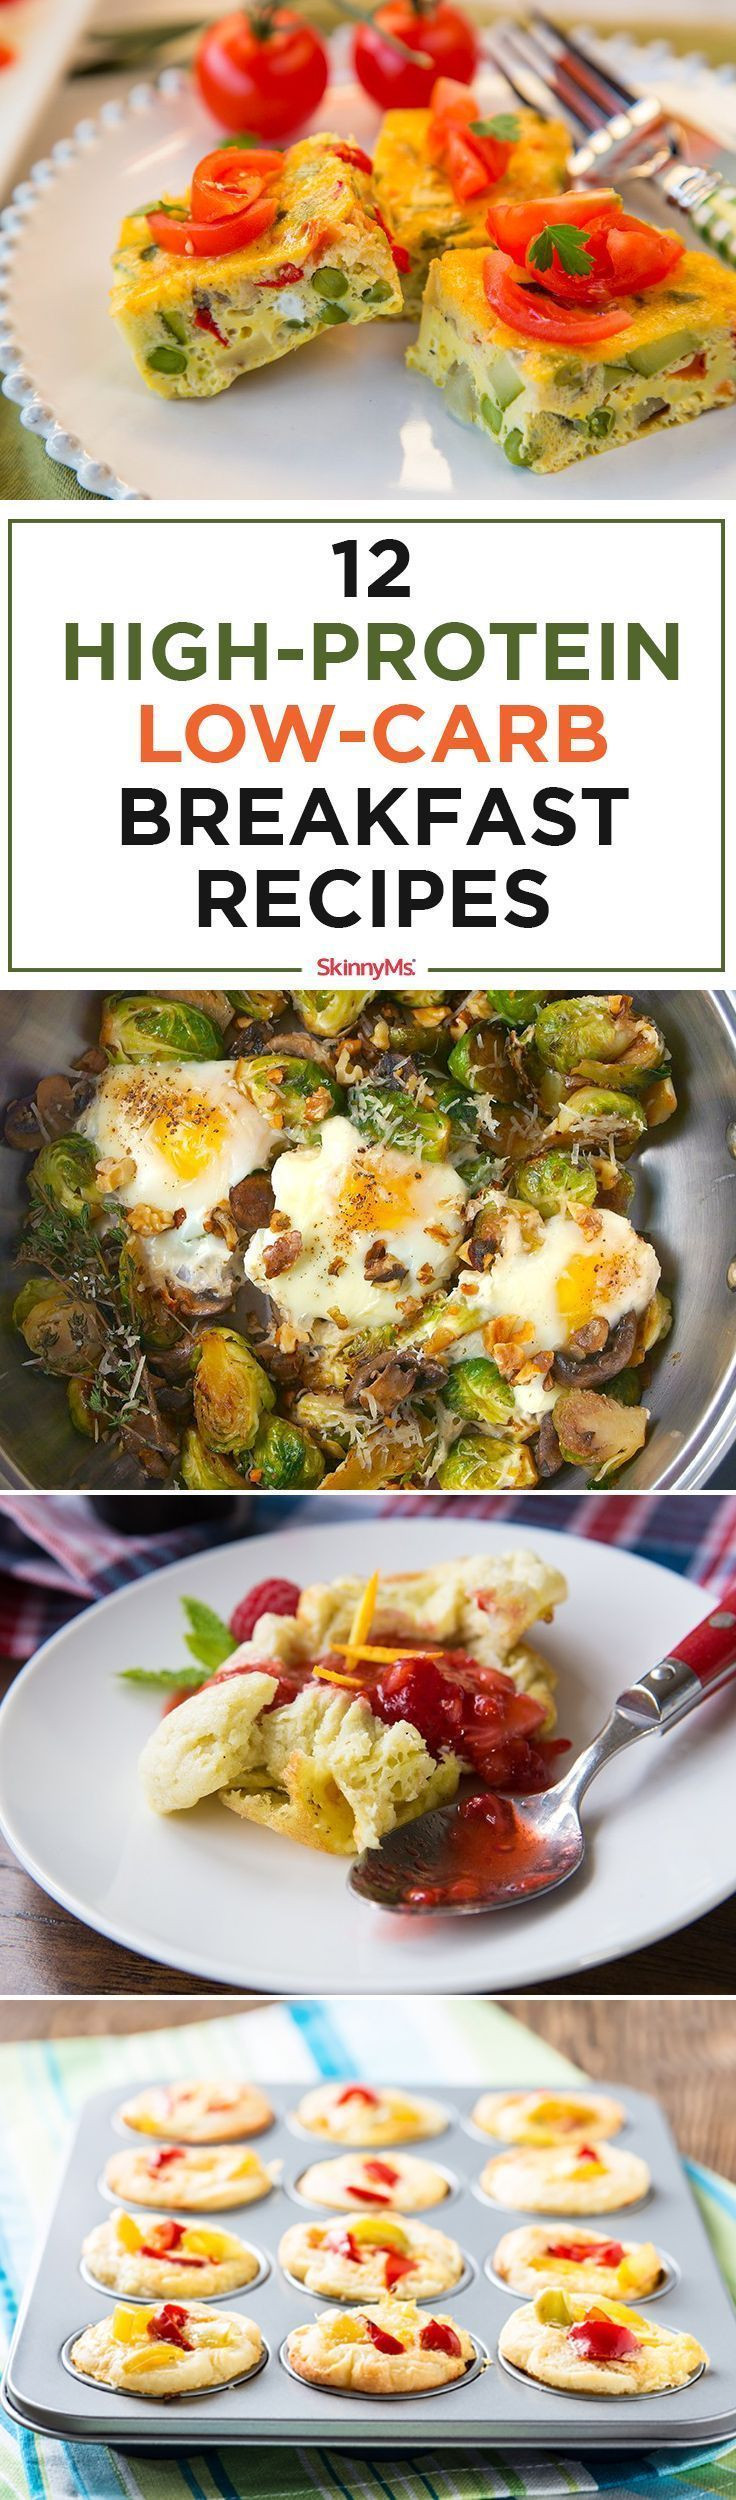 High Protein Low Carb Snack Recipes
 29 best images about Healthy snacks on Pinterest